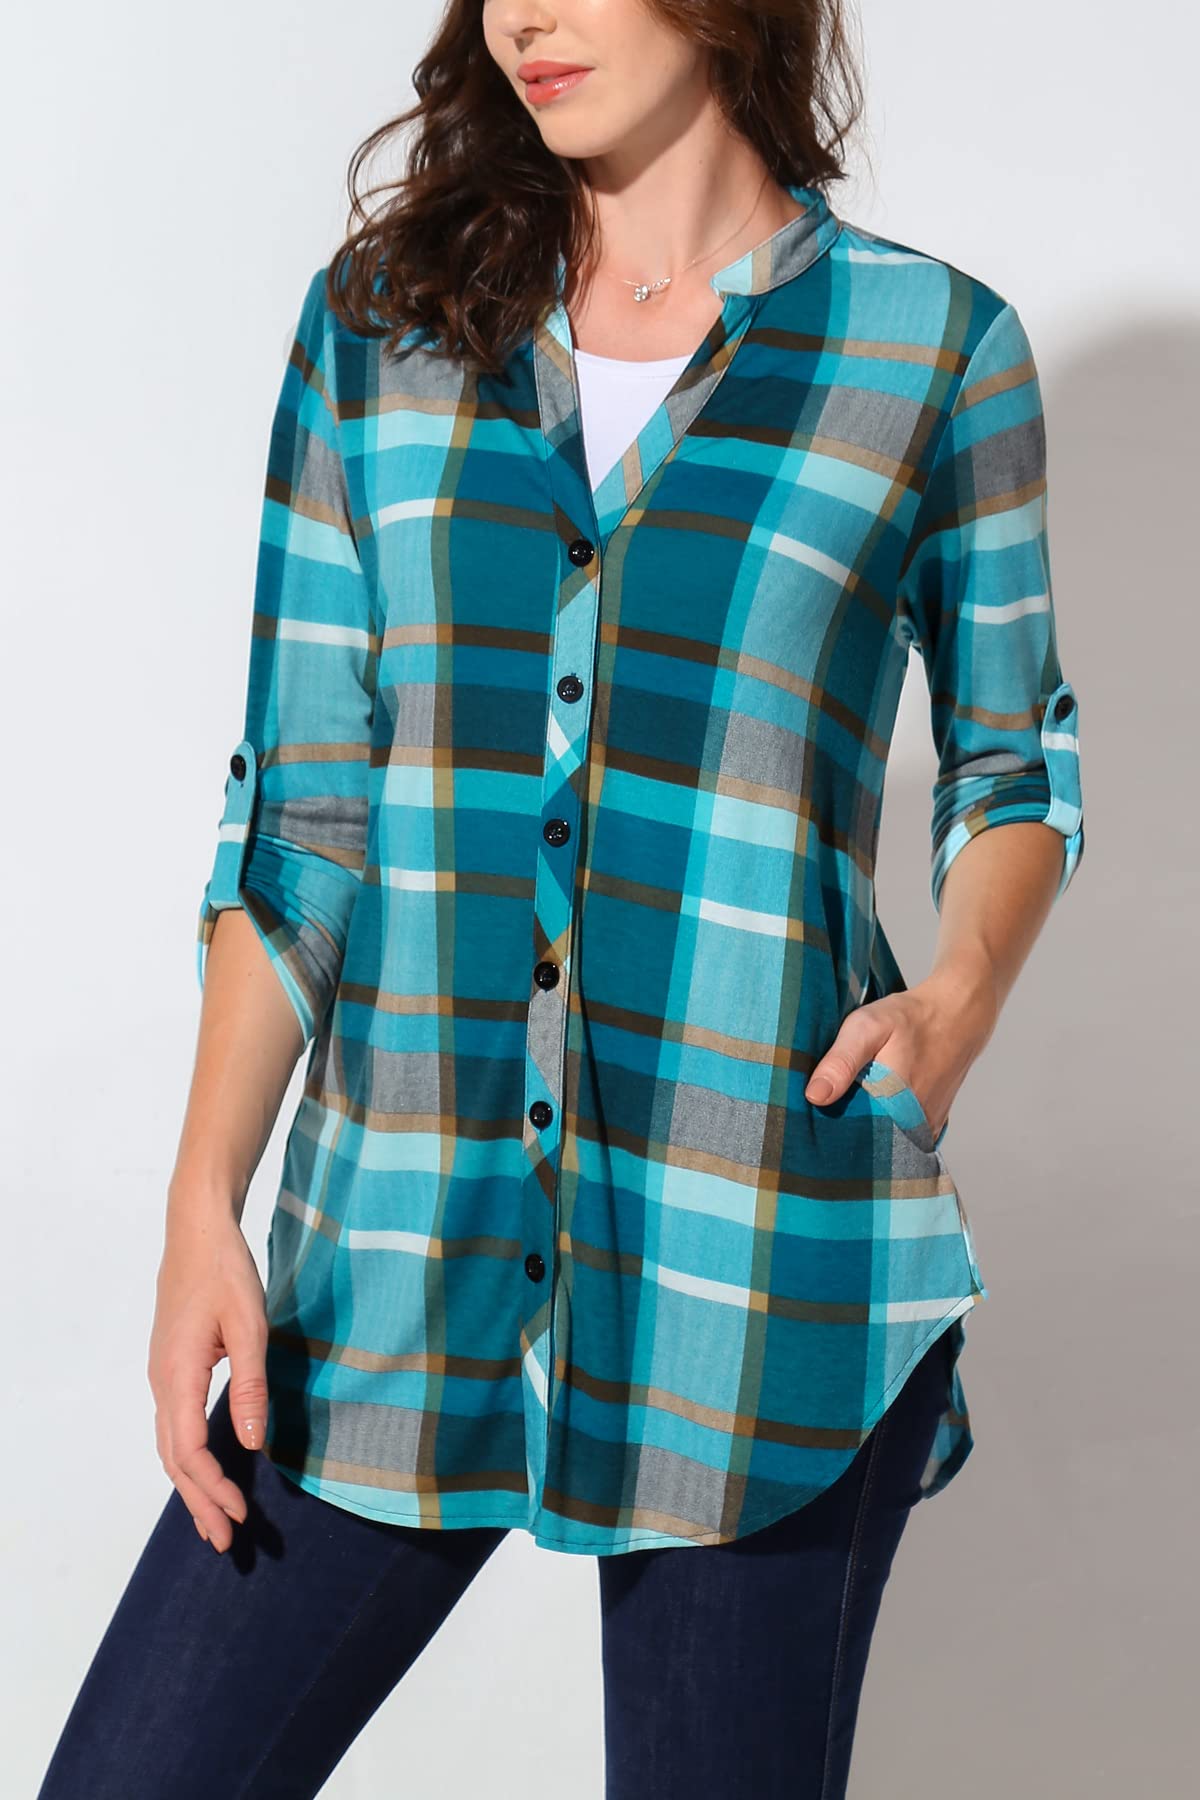 DJT Ocean Depths Women's Soft Knitted Roll Up 3/4 Sleeve Pockets Casual Button Down Plaid Shirts